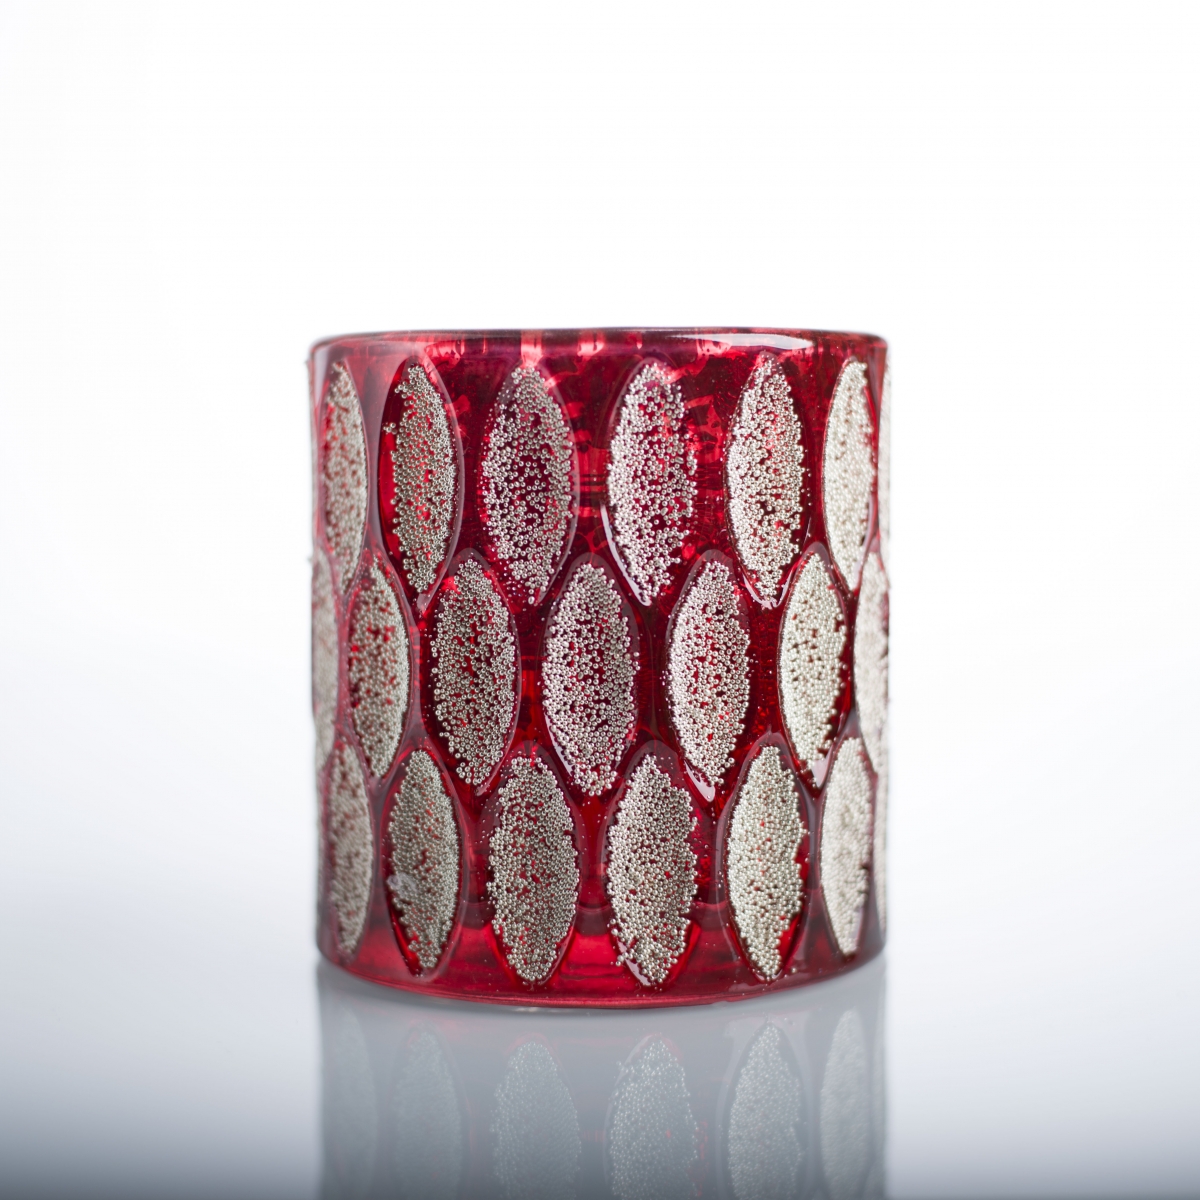 Glass Candle Holder :Geometric Emboss ,Leaf ,Gold Bead ,Christmas Red ,Home Decoration ,China Factory ,Wholesale Price-HOWCANDLE-Candles,Scented Candles,Aromatherapy Candles,Soy Candles,Vegan Candles,Jar Candles,Pillar Candles,Candle Gift Sets,Essential Oils,Reed Diffuser,Candle Holder,